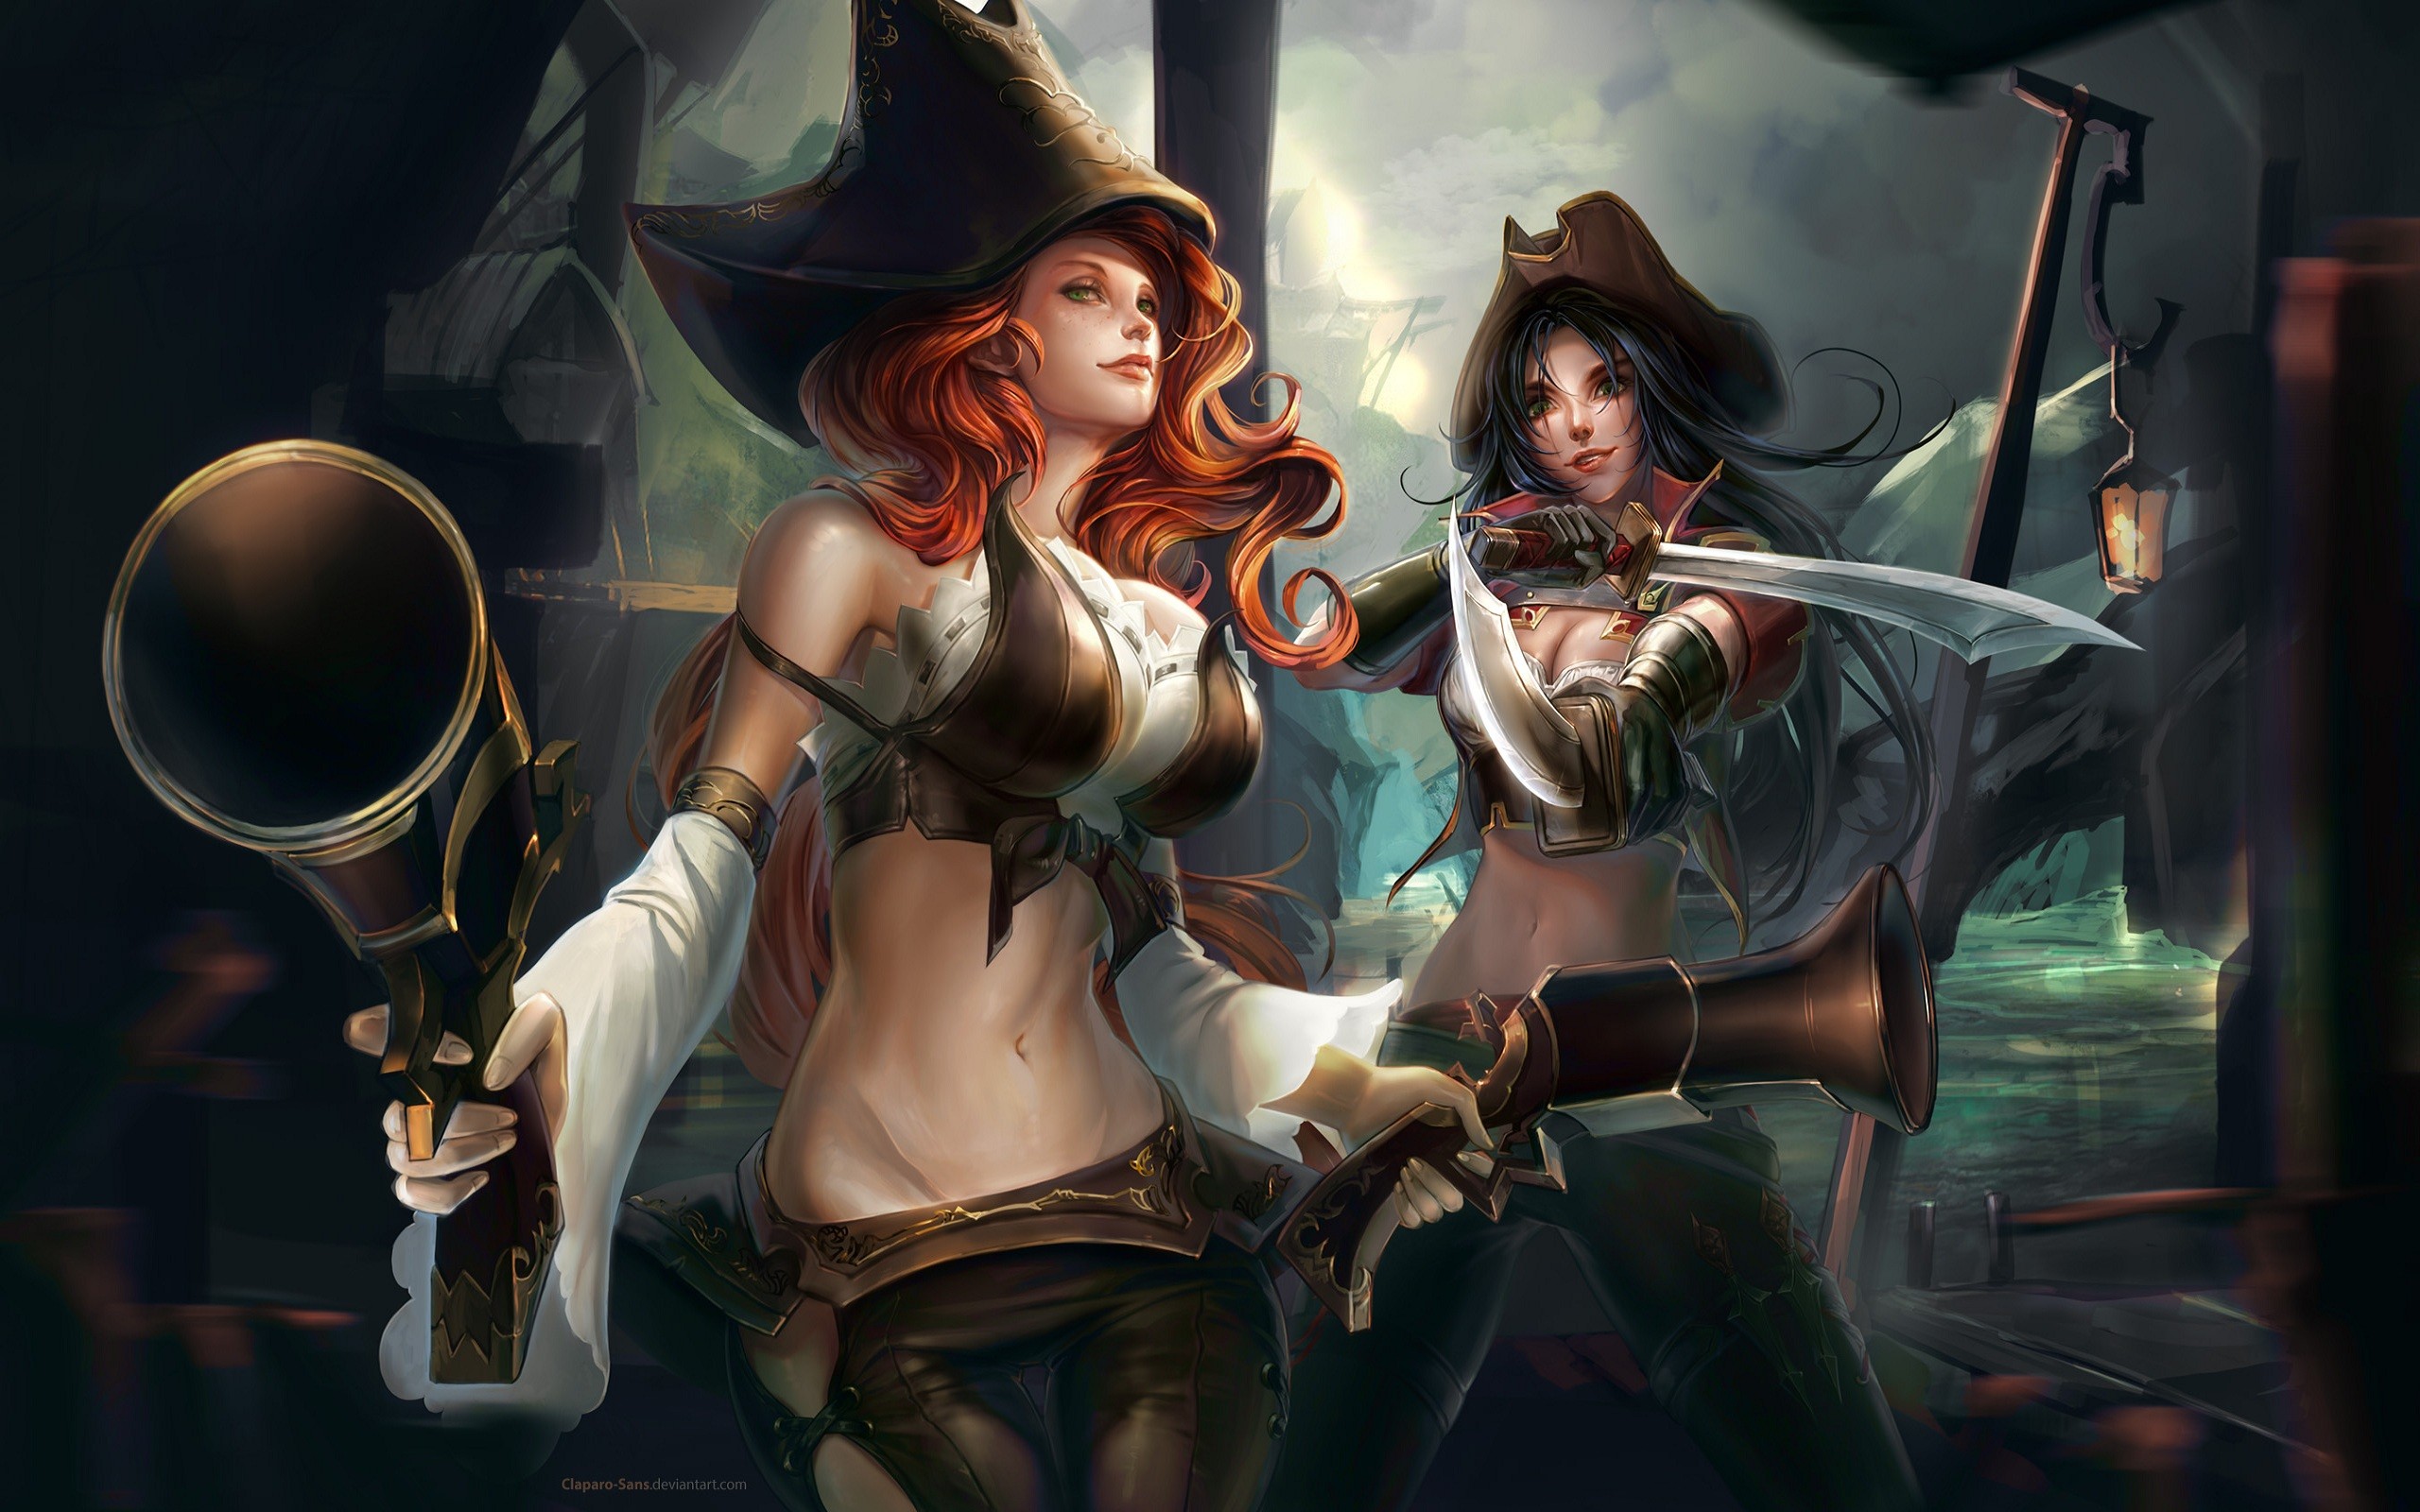 General 2560x1600 League of Legends video games gun hat sword long hair women Miss Fortune (League of Legends) Katarina (League of Legends) girls with guns dual wield PC gaming belly women with swords pirates two women video game girls video game art video game characters